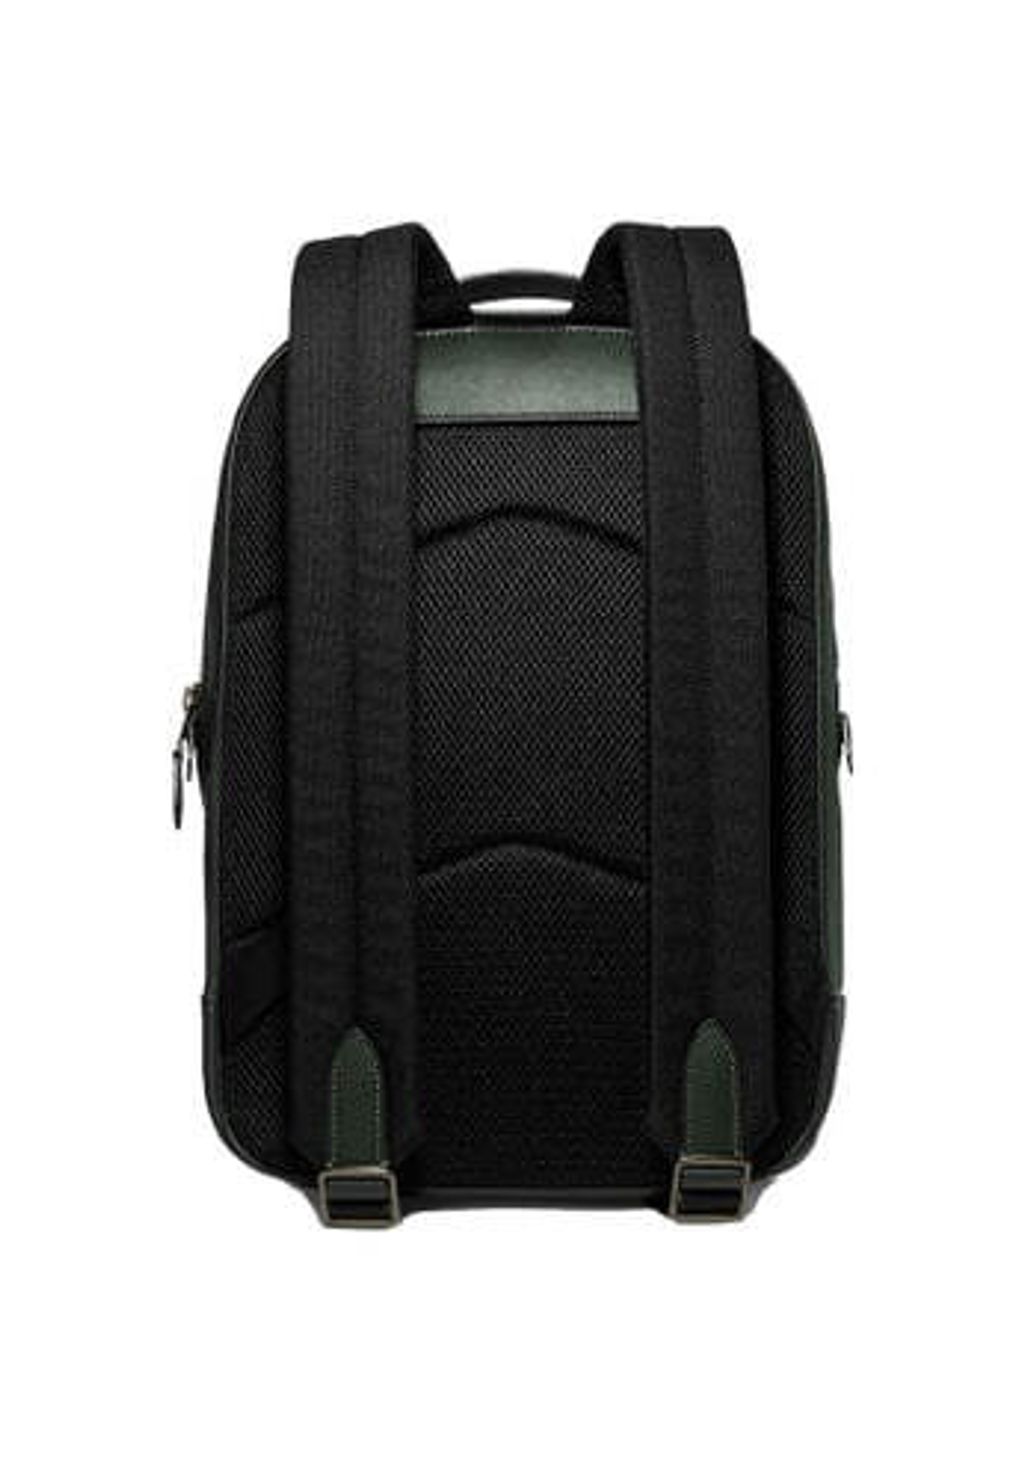 handbagbranded.com getlush outlet personalshopper usa malaysia ready stock Coach WESTWAY BACKPACK 3